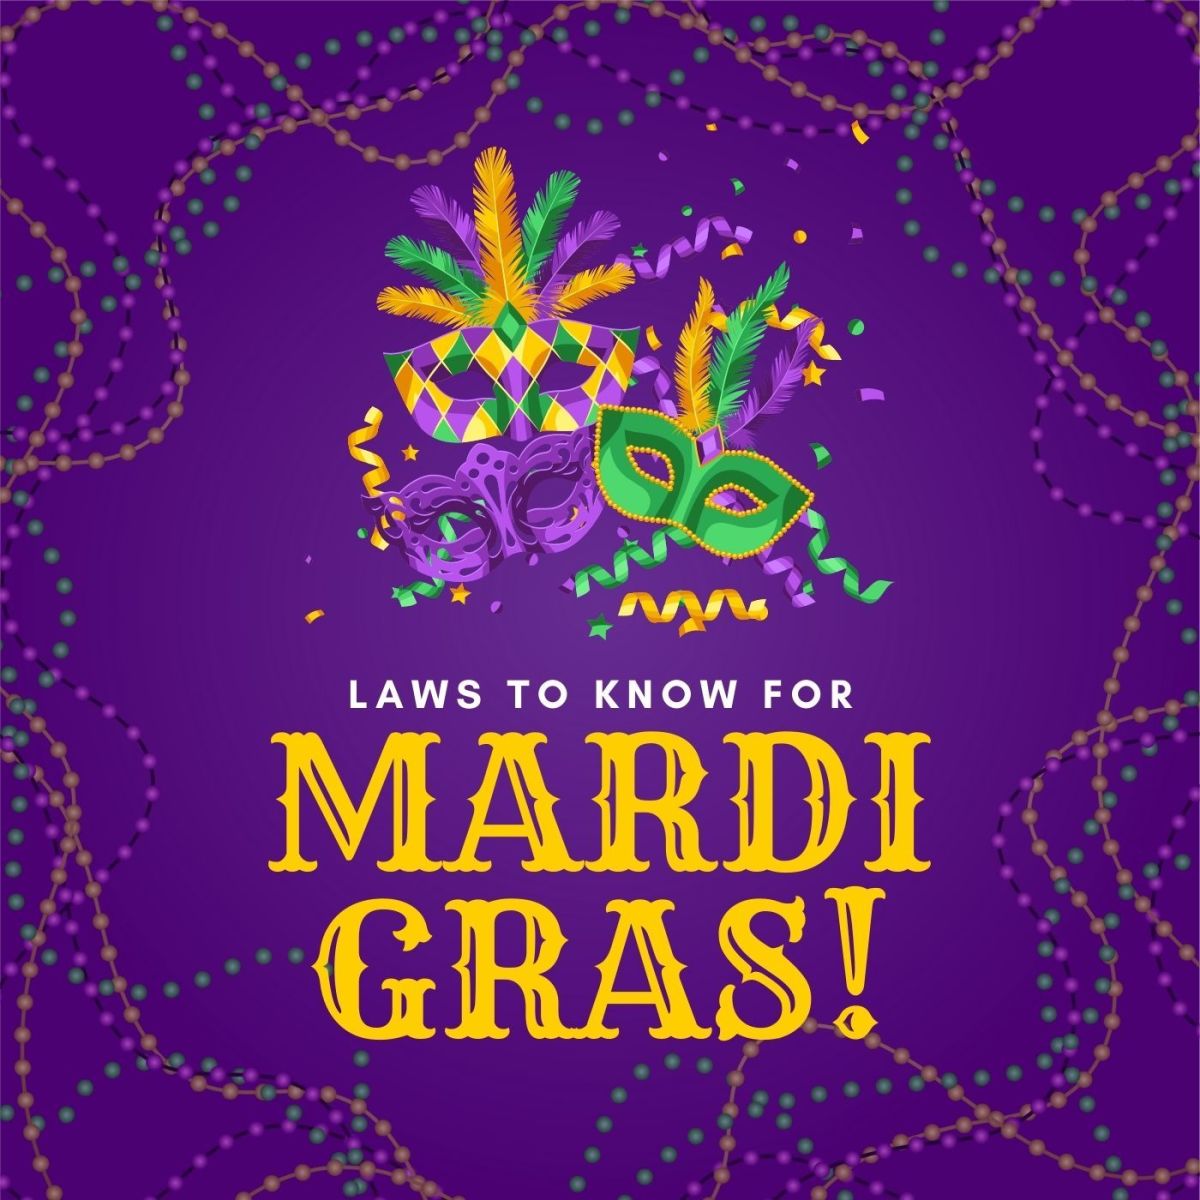 Laws to Know for Mardi Gras in New Orleans, LA